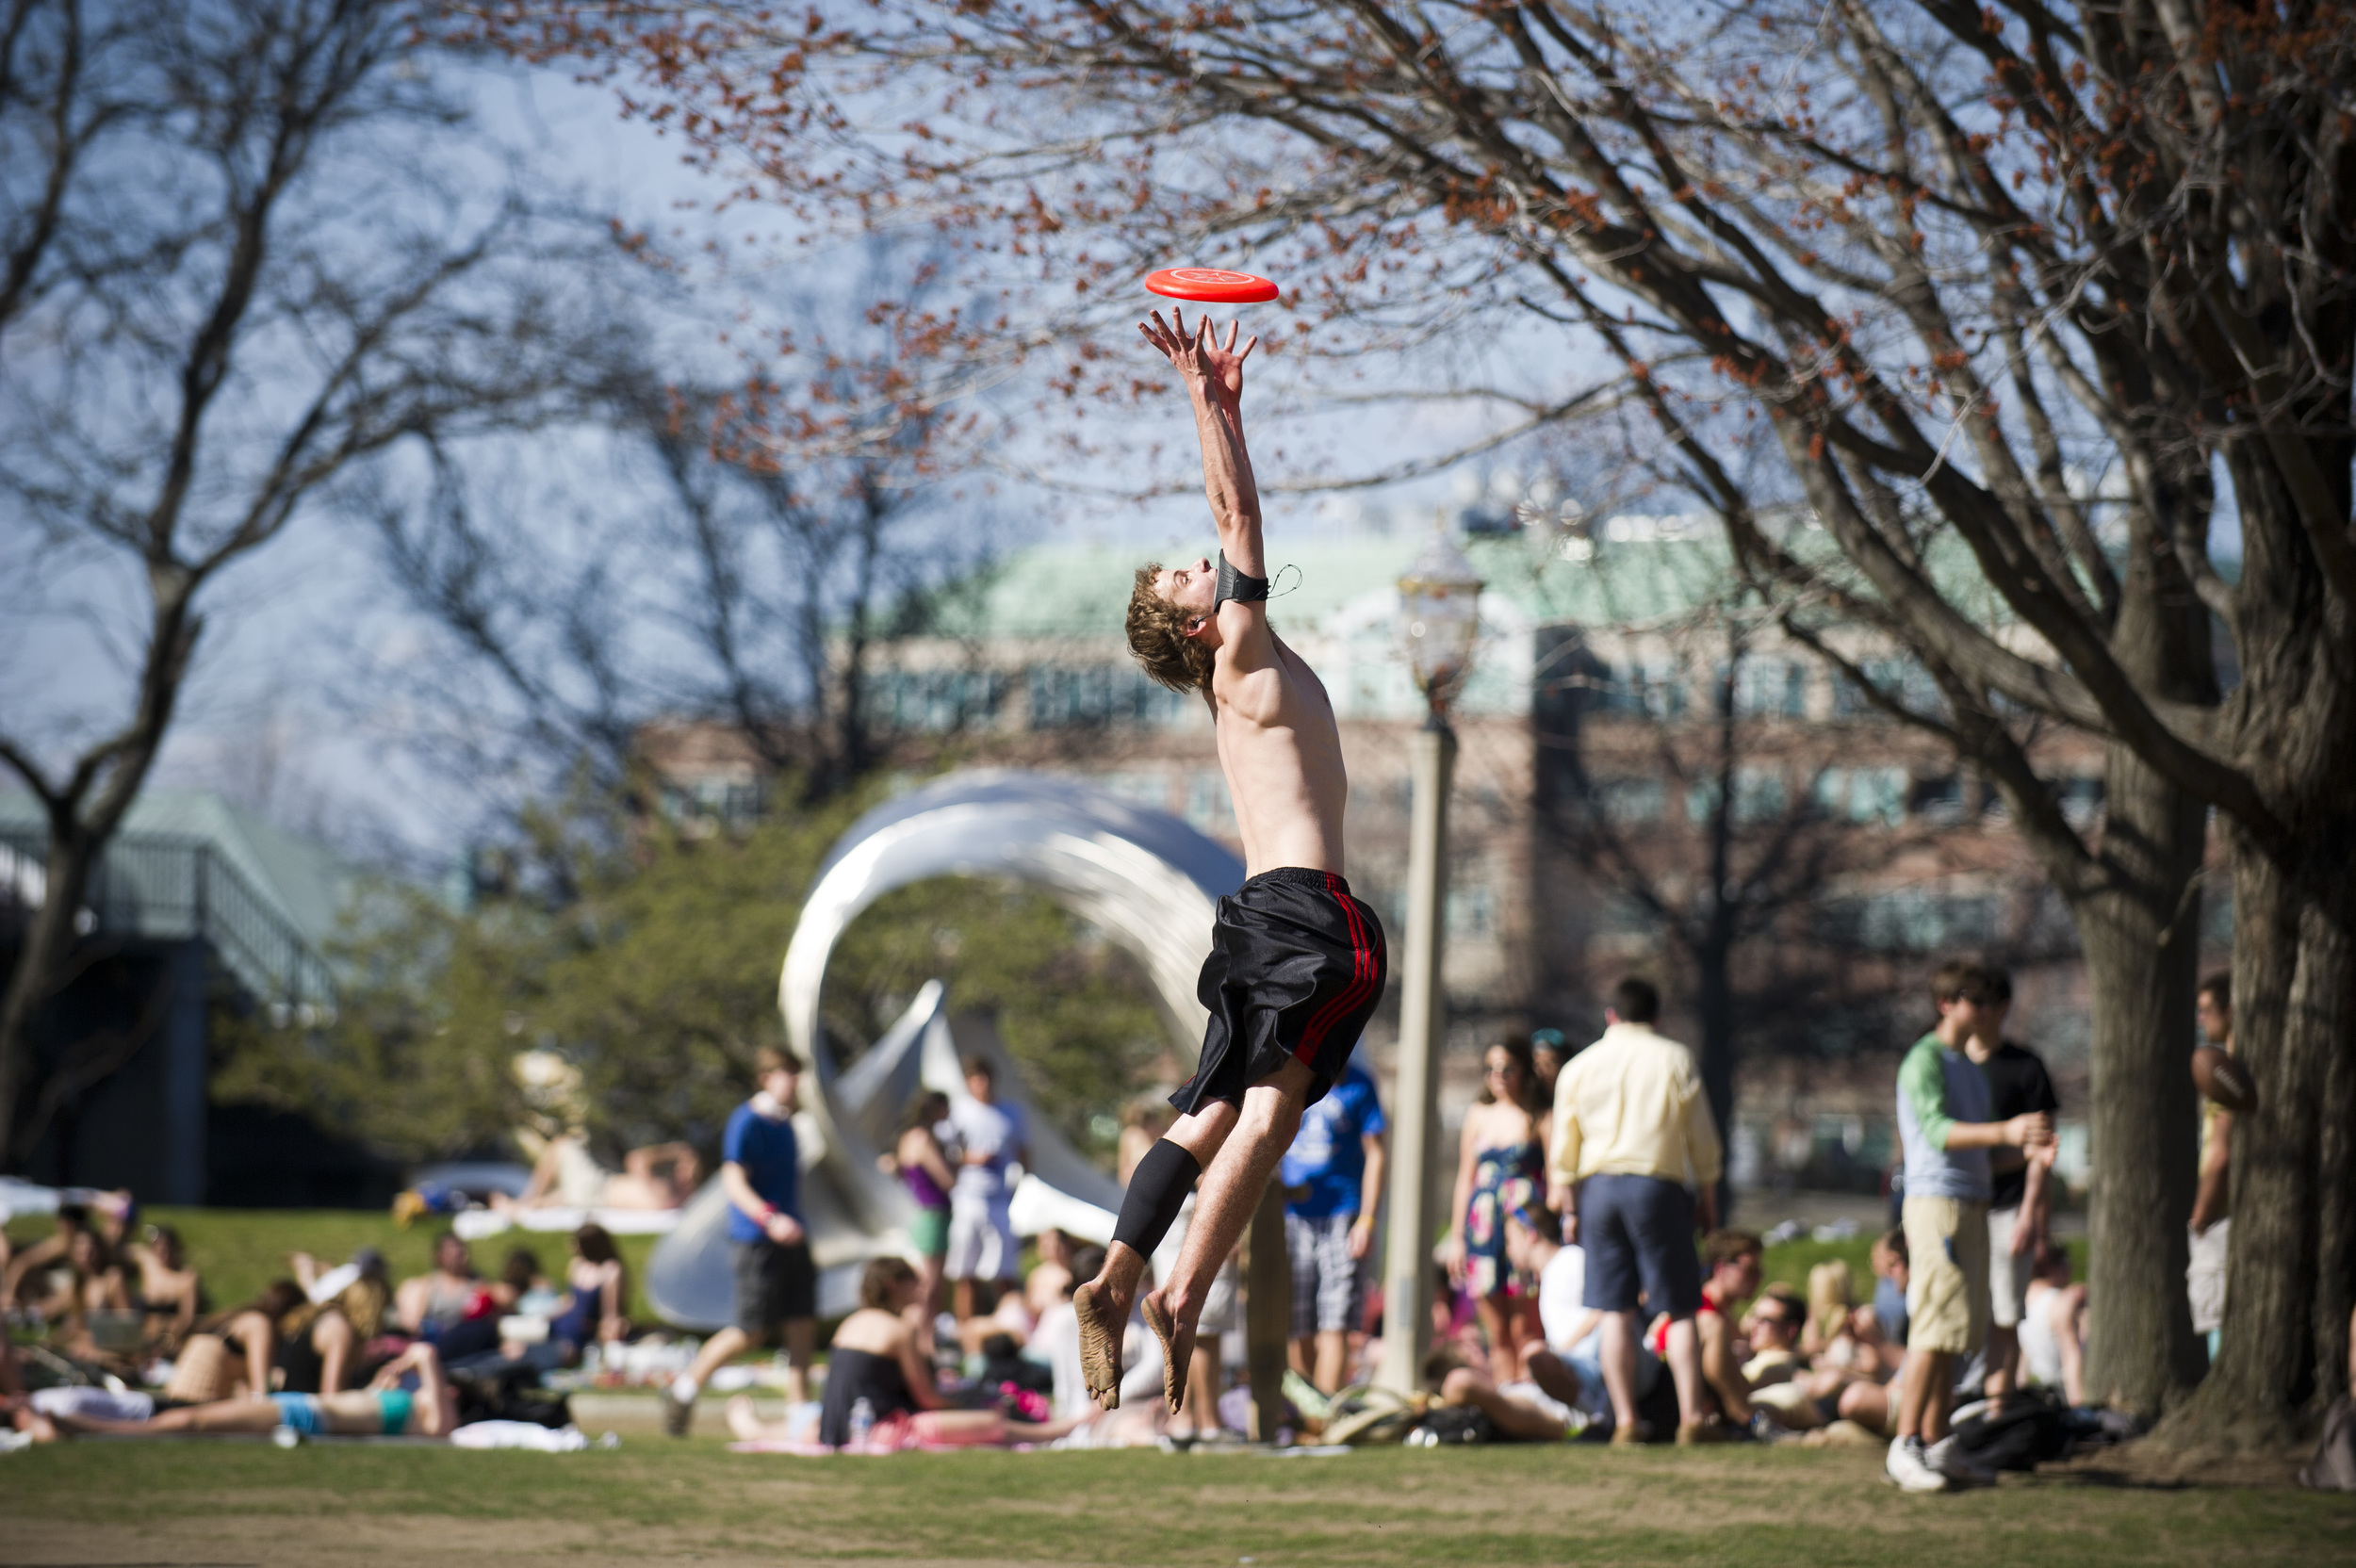  Andy Beckenbach (ENG'13) enjoys some frisbee with friends on BU Beach March 22, 2012. The crowd at BU Beach was massive thanks to the bright sun and hot temperatures.  Photo by Cydney Scott for Boston University Photography 